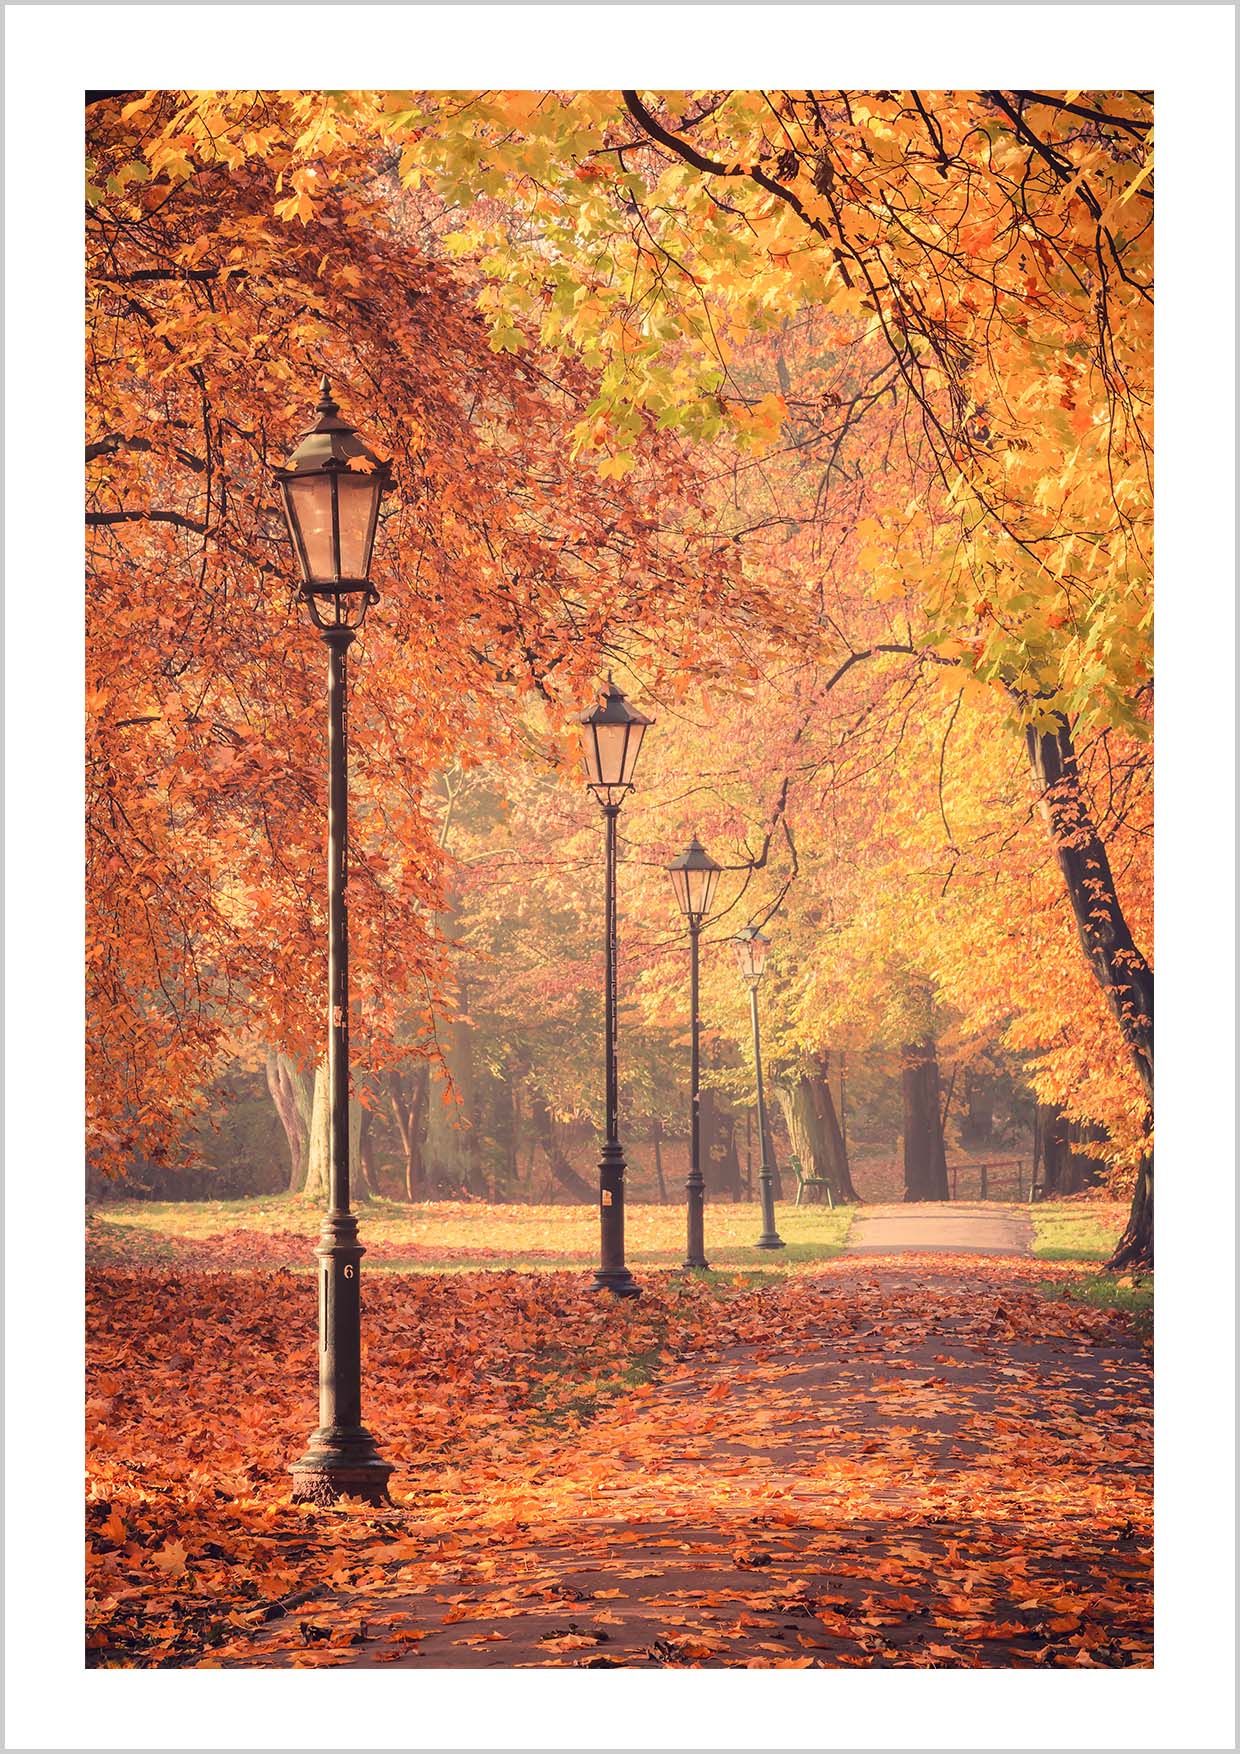 Photo print featuring a picturesque path blanketed in golden fall leaves. The traditional street lights and the old trees give character to the scene. This print truly captures the magic of fall. Hang it in your living room or hallway to bring the captivating beauty of fall into your everyday life.